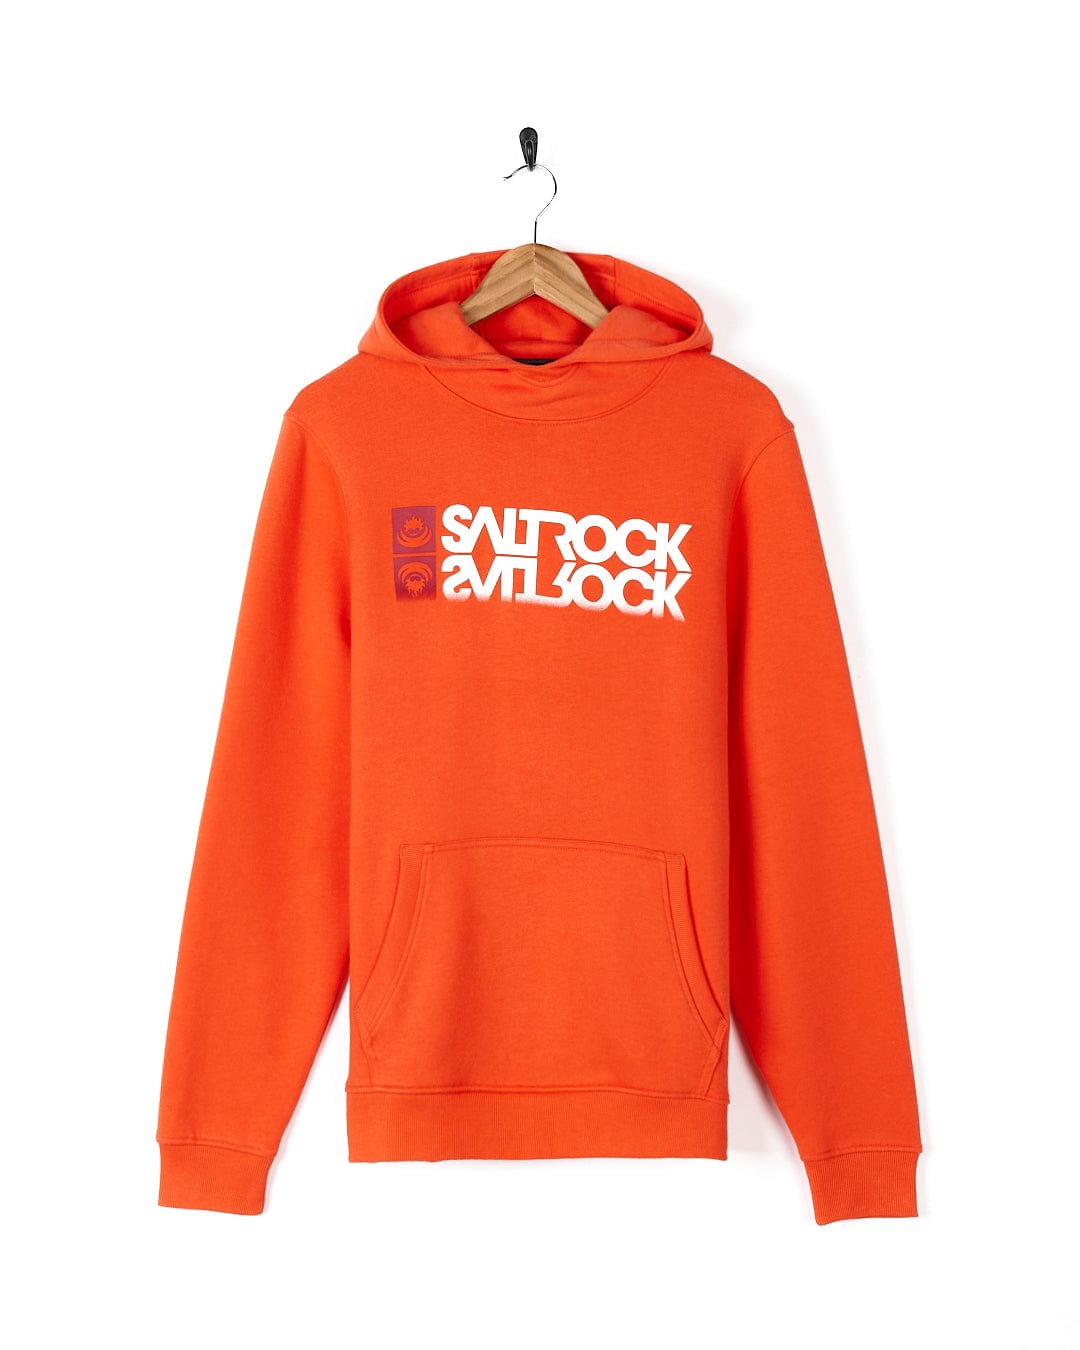 An orange Saltrock Reflect - Mens Pop Hoodie, made from a cotton blend, featuring the word surfrock.